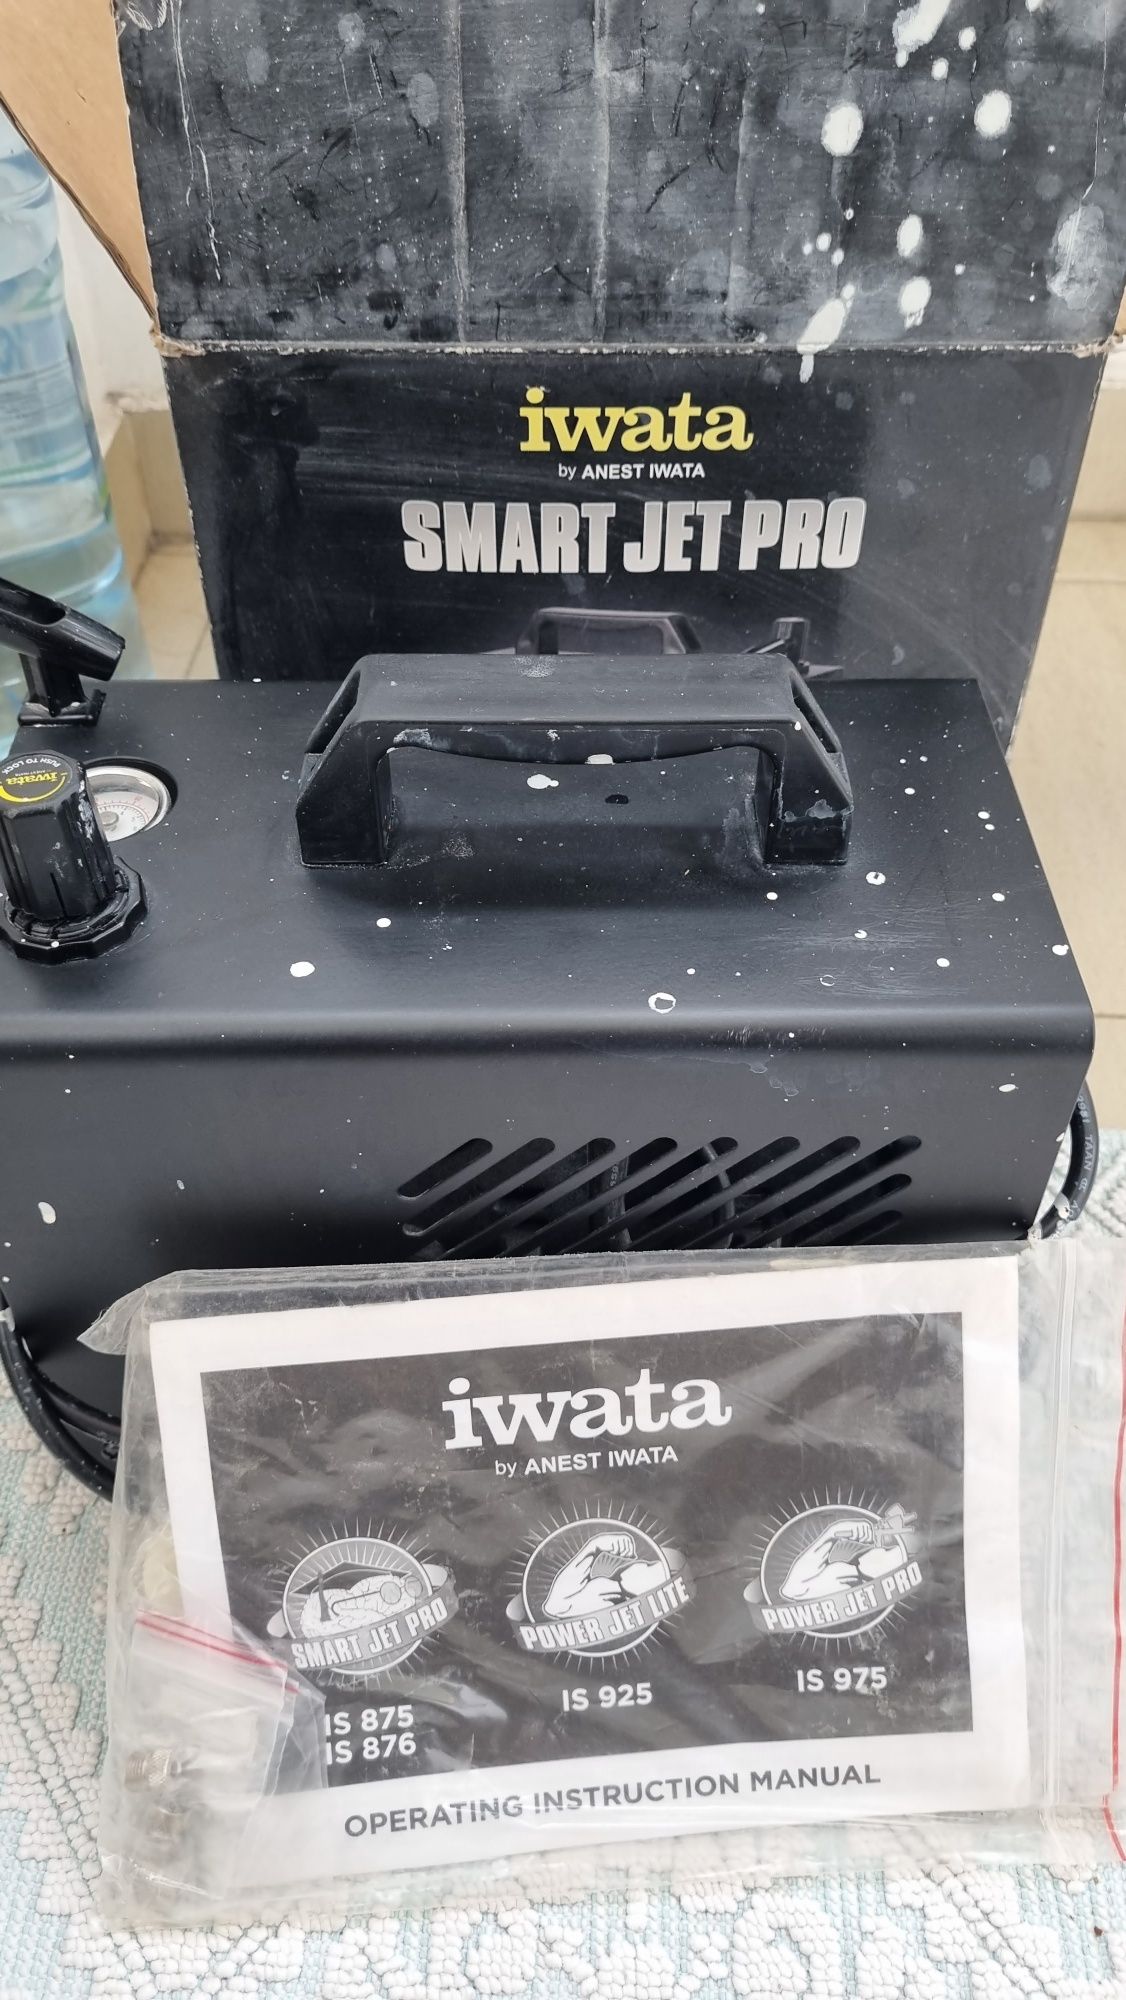 Anest Iwata IS975 Anest Iwata Power Jet Pro Airbrush Compressors